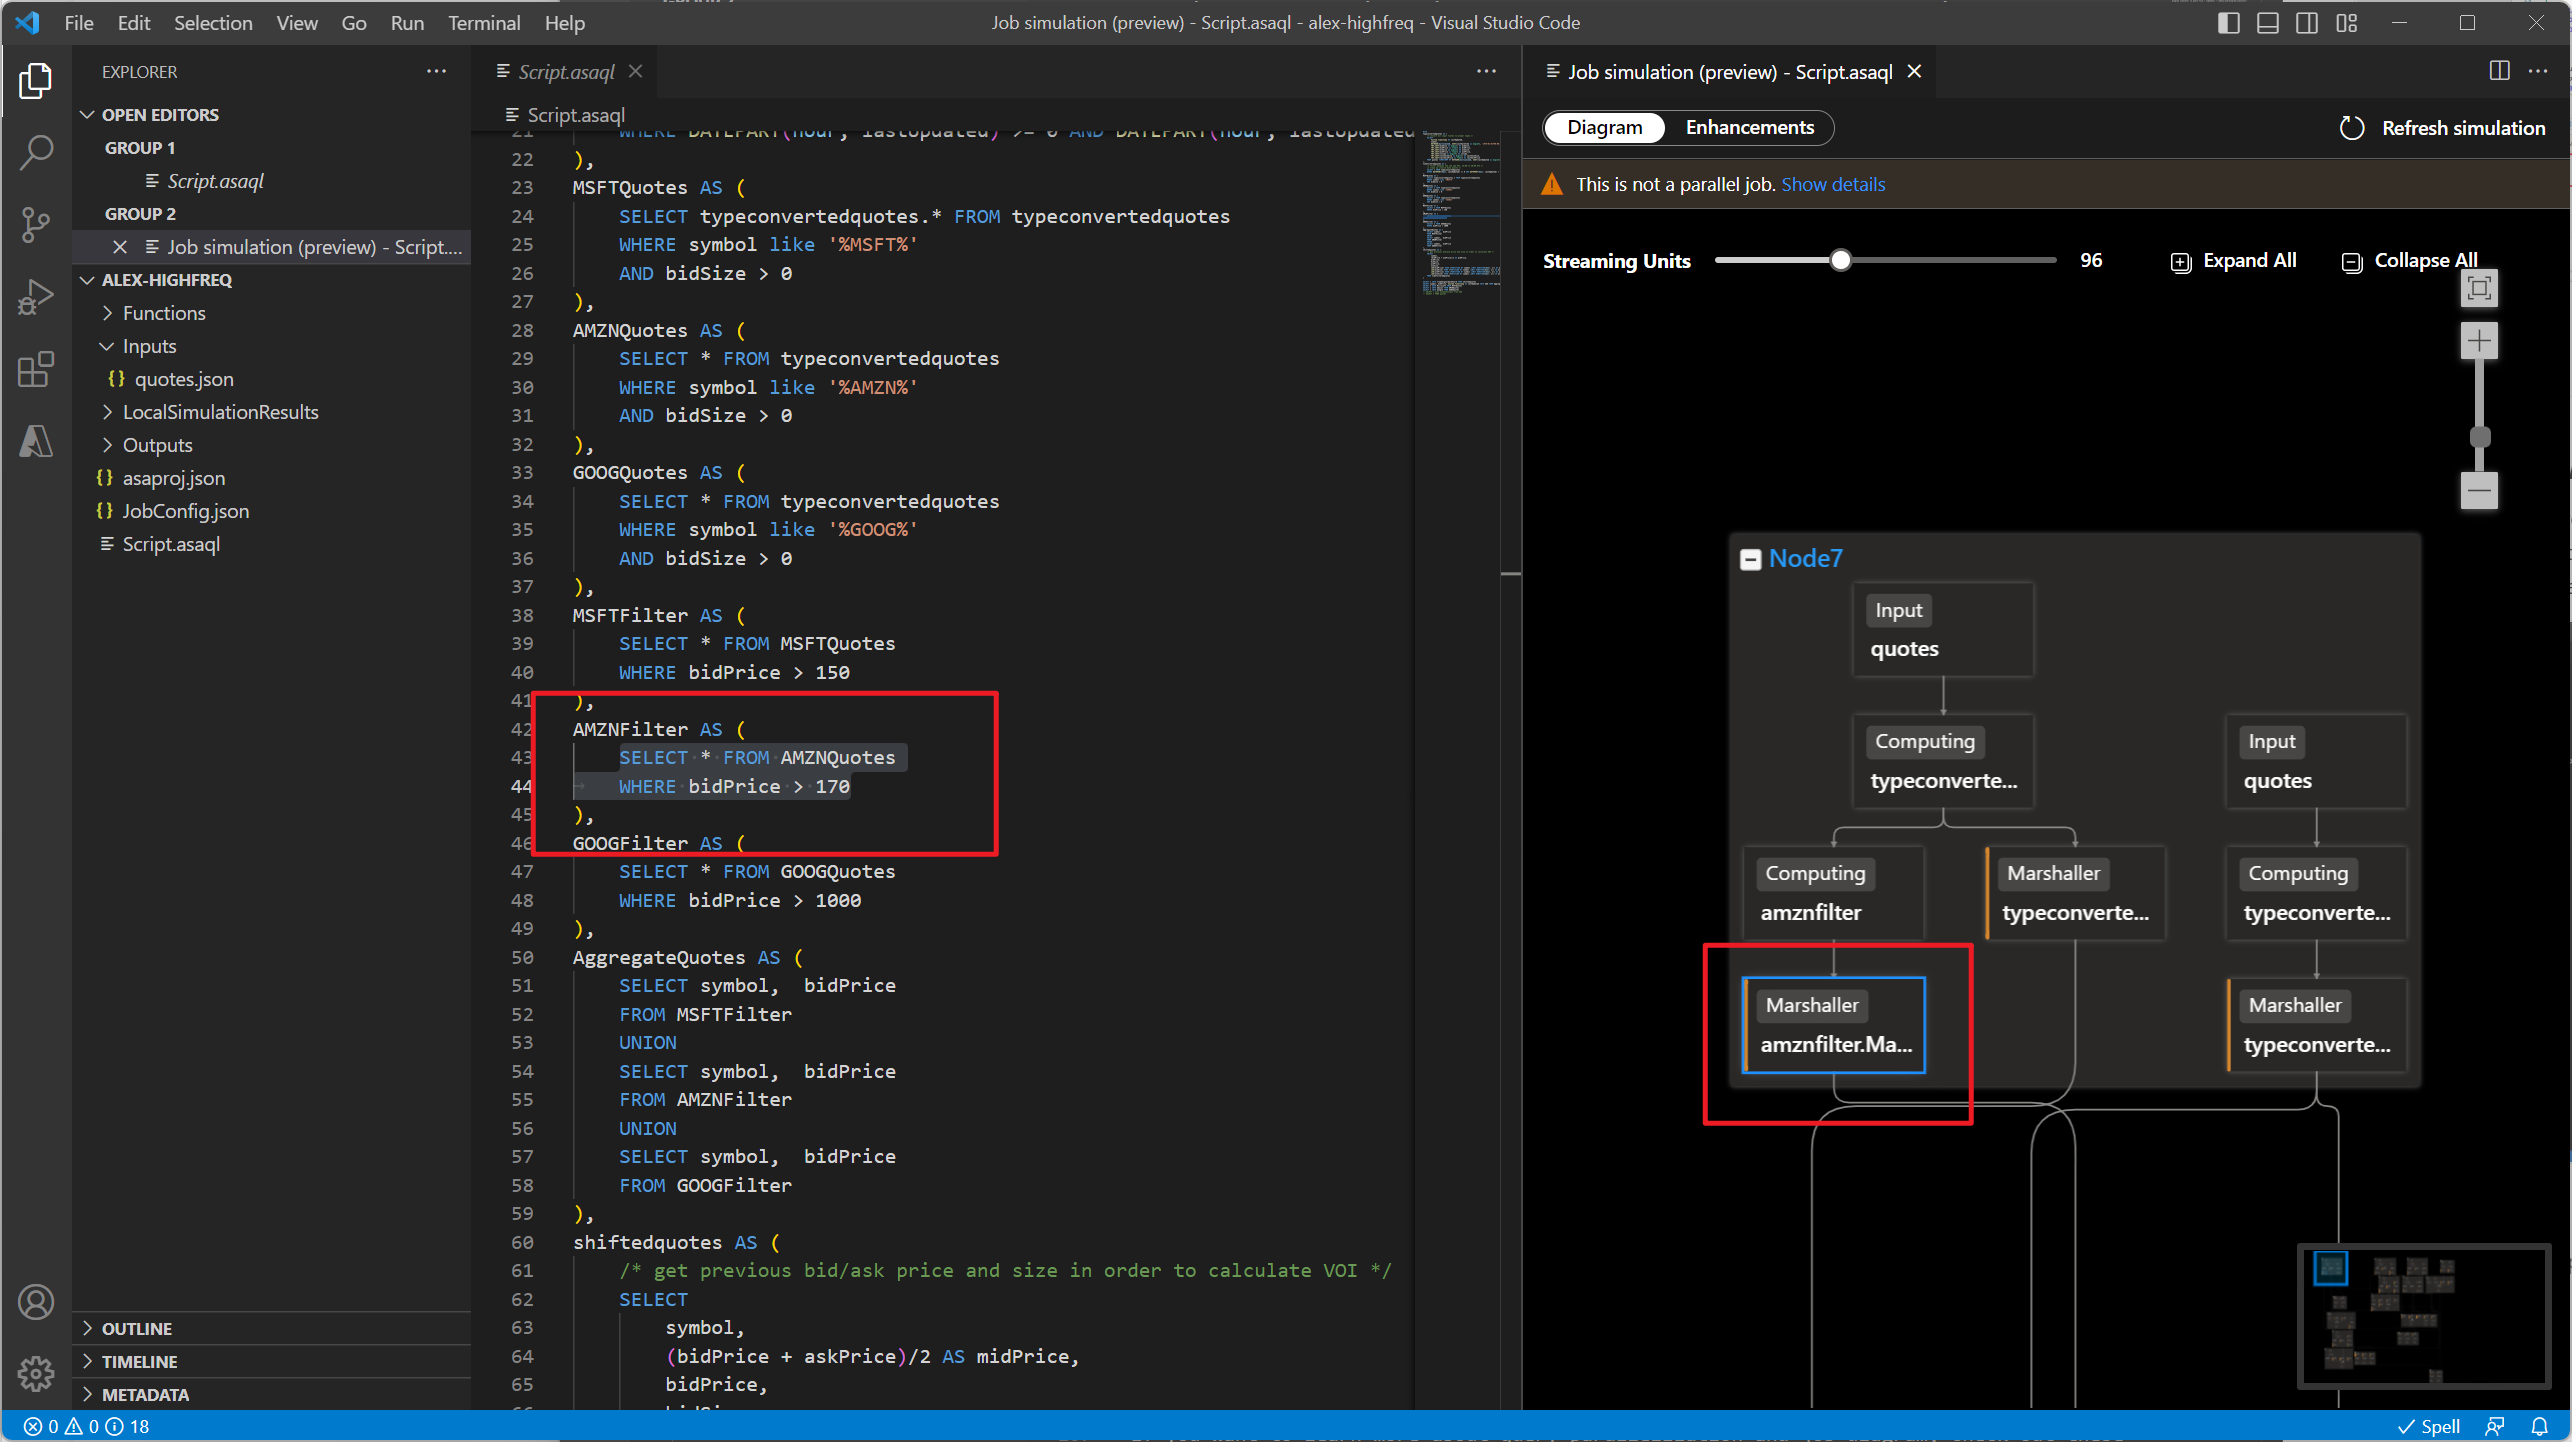 A screenshot shows the job simulation mapping feature in VS Code.